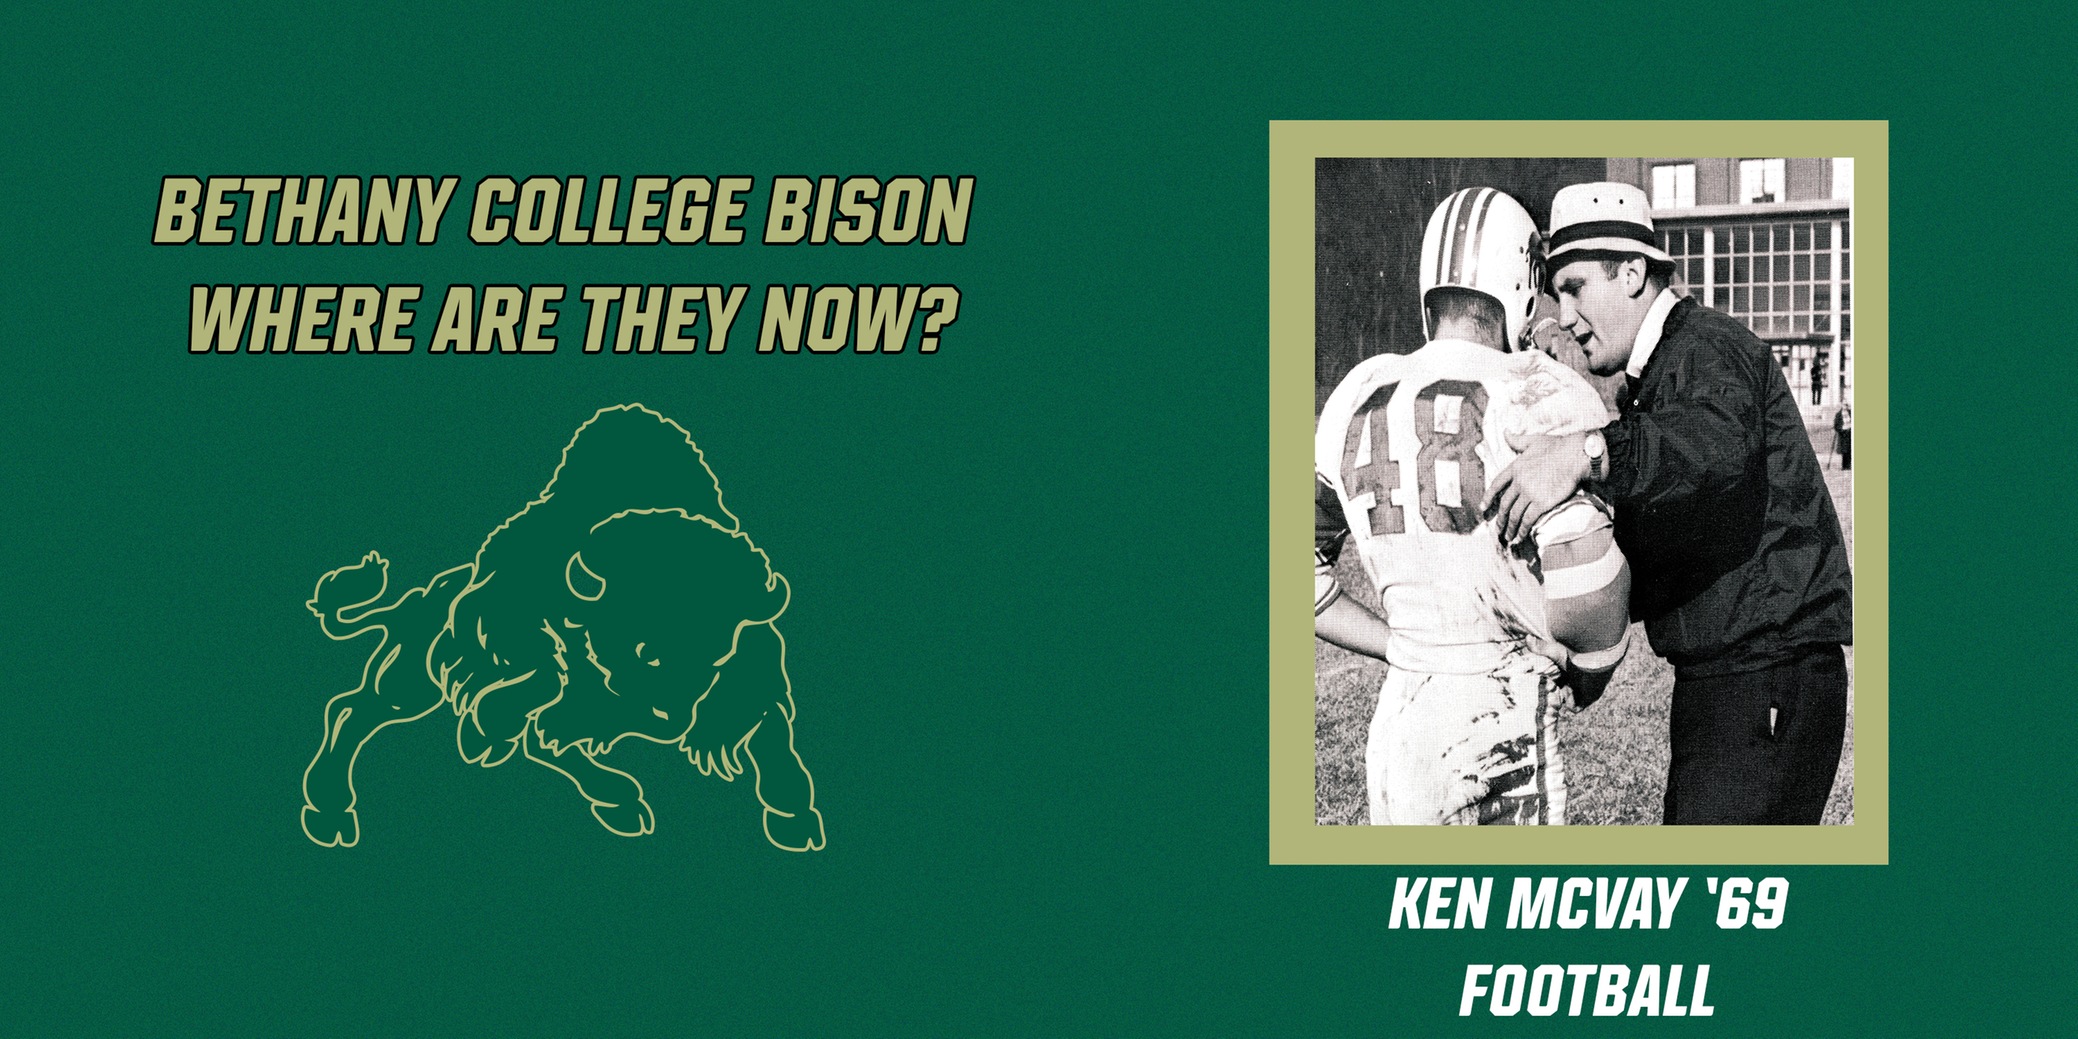 Where Are They Now Series - Ken McVay 69', Football